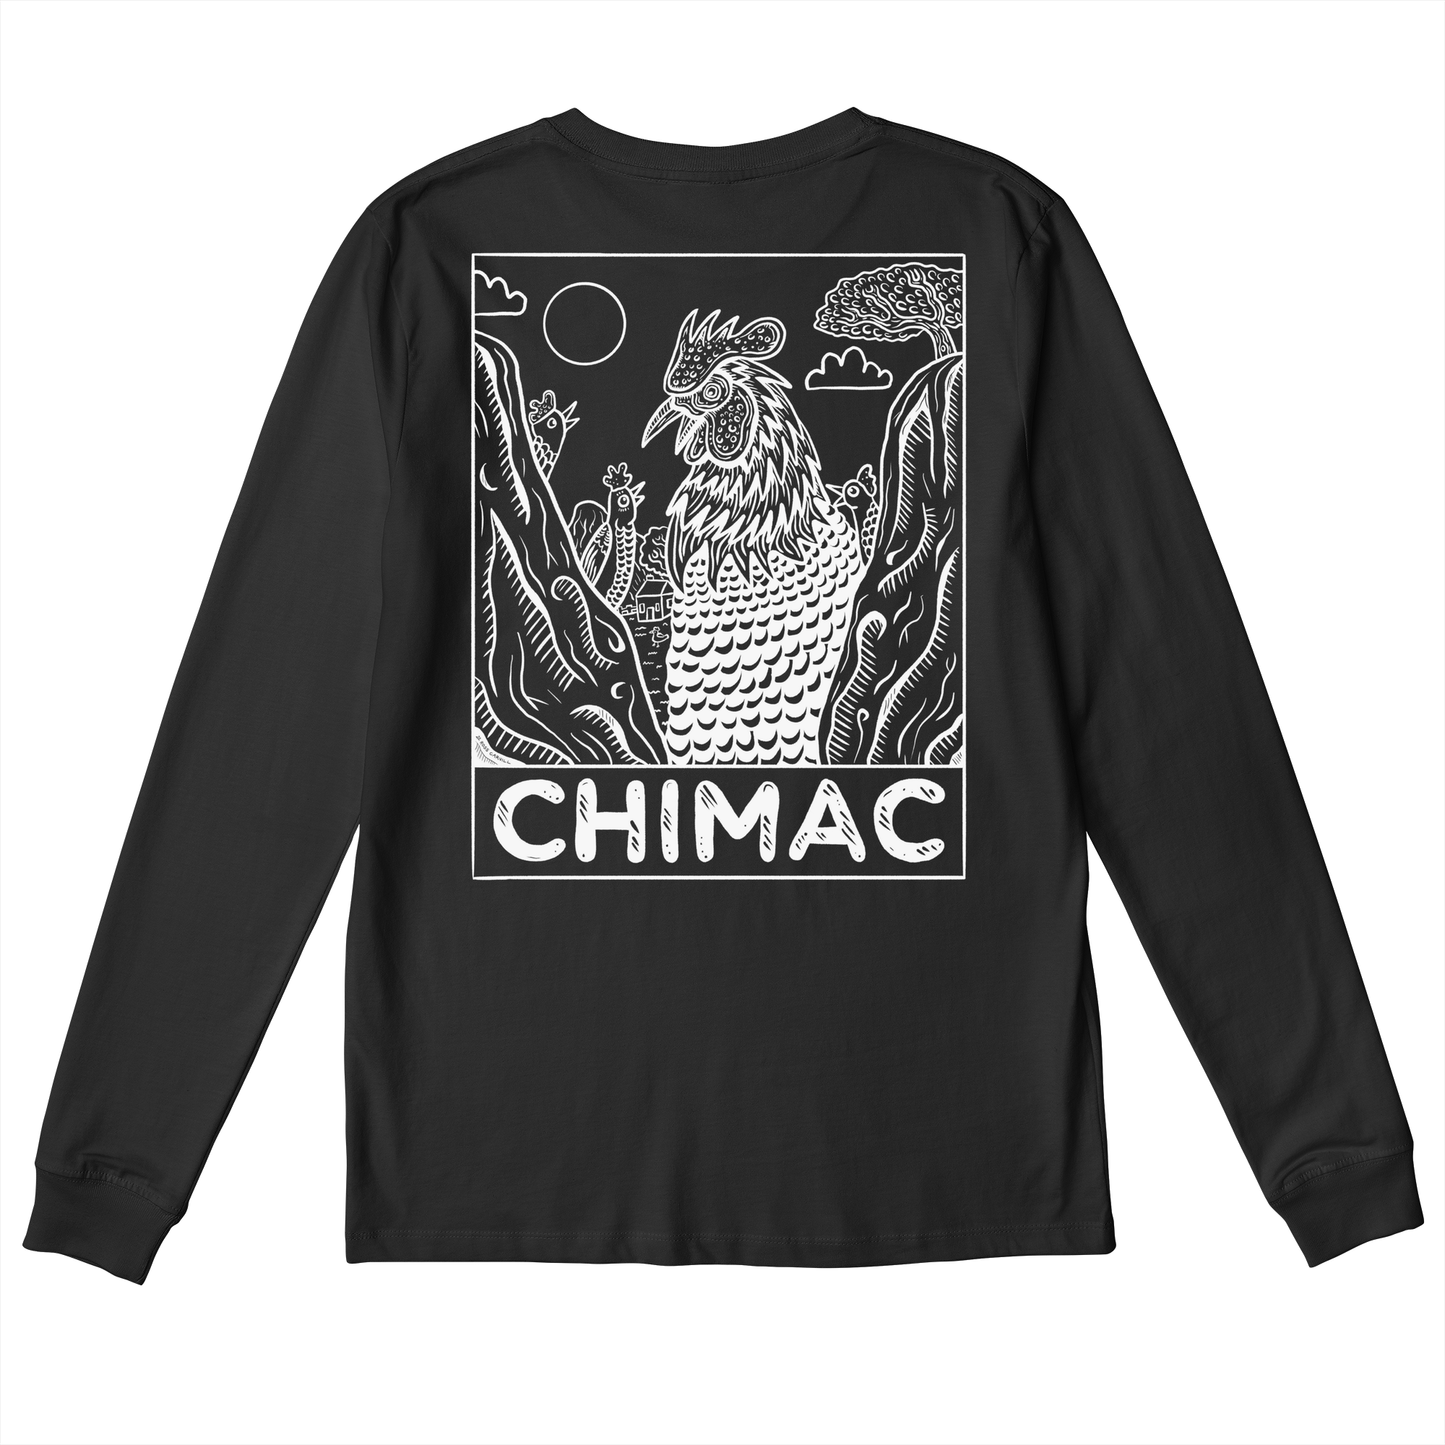 Legend of Chimac (white) - Organic Long Sleeve With Cuffs